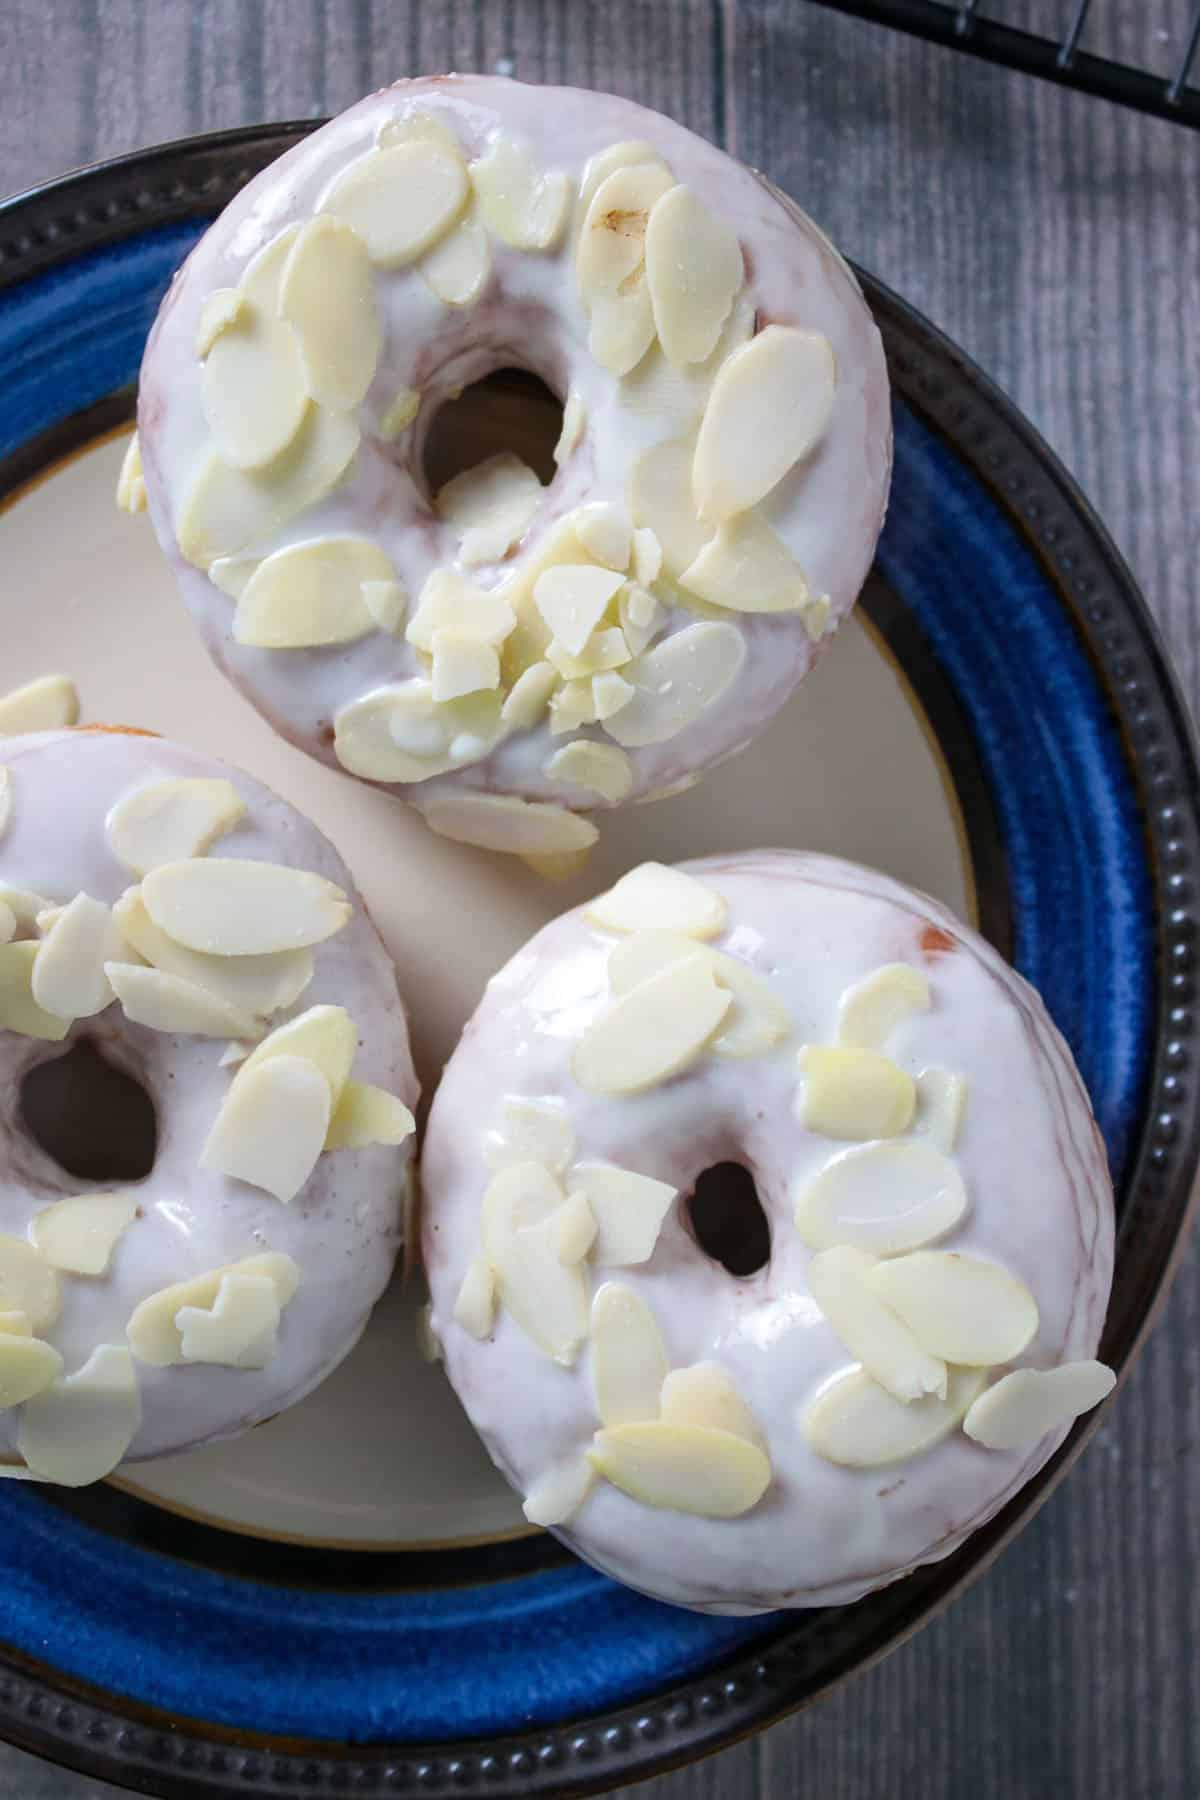 Three yeast donuts with white chocolate gaze on a plate.